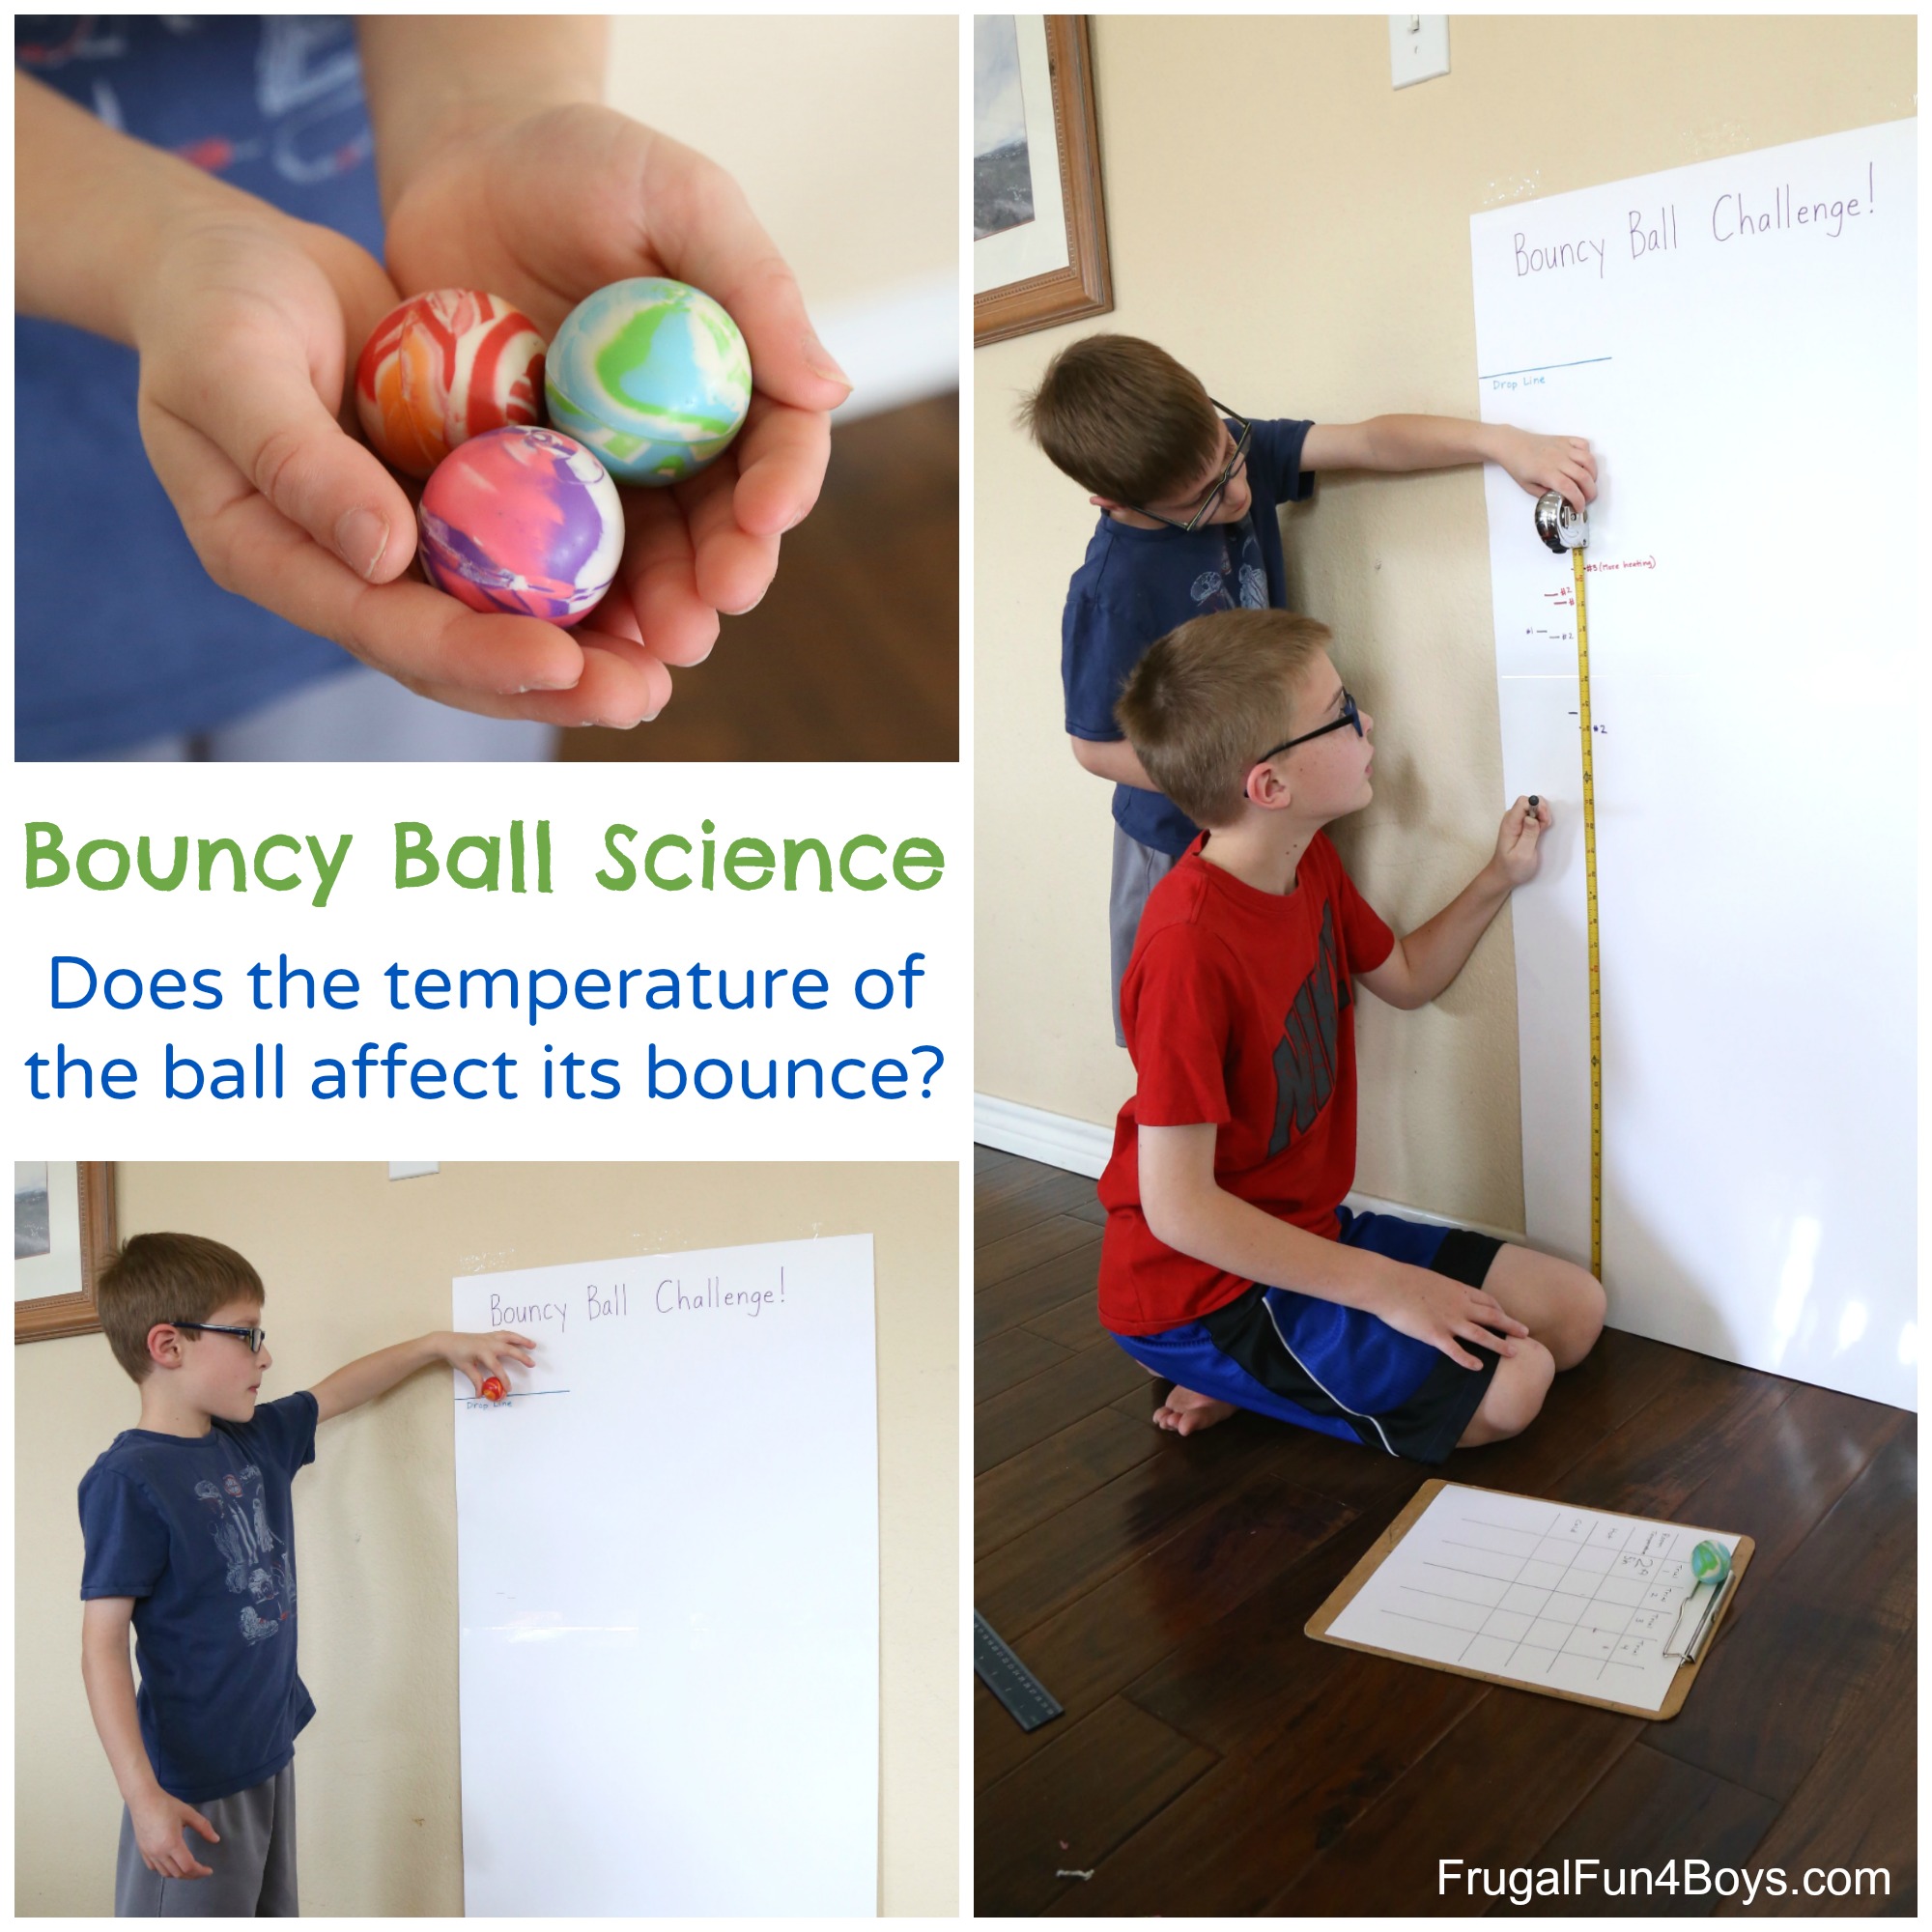 Bouncy Ball Science:  Does the temperature of the ball affect its bounce?